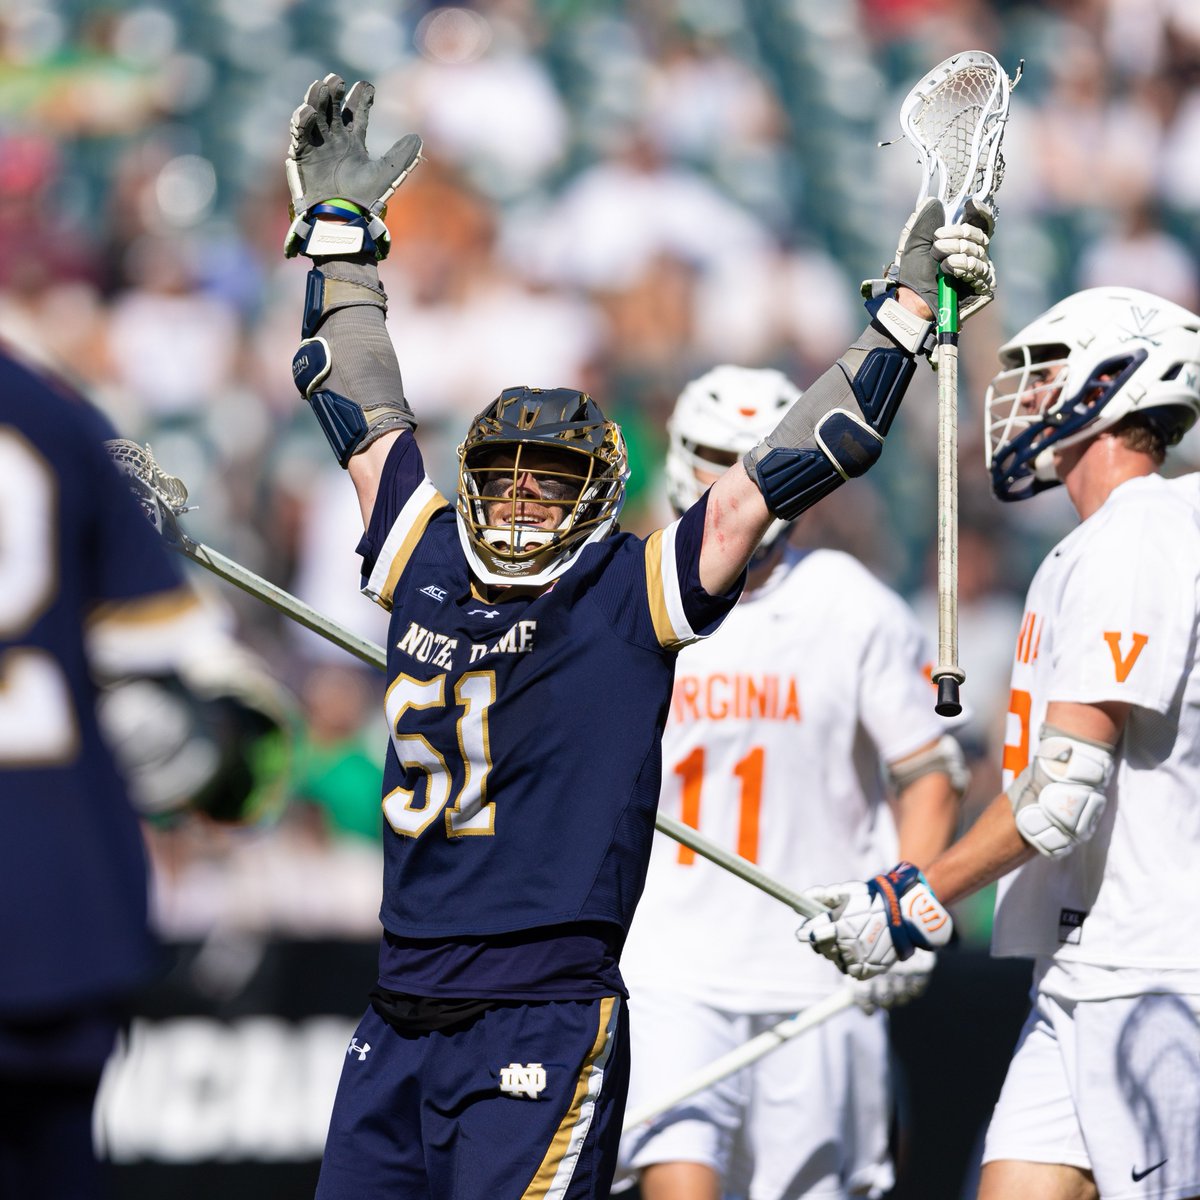 Notre Dame's all-time leader in men's lacrosse points, Pat Kavanagh, joined the Pat McAfee Show to talk all things Irish ahead of the NCAA Tournament. @tbhorka has the highlights: on3.com/teams/notre-da…